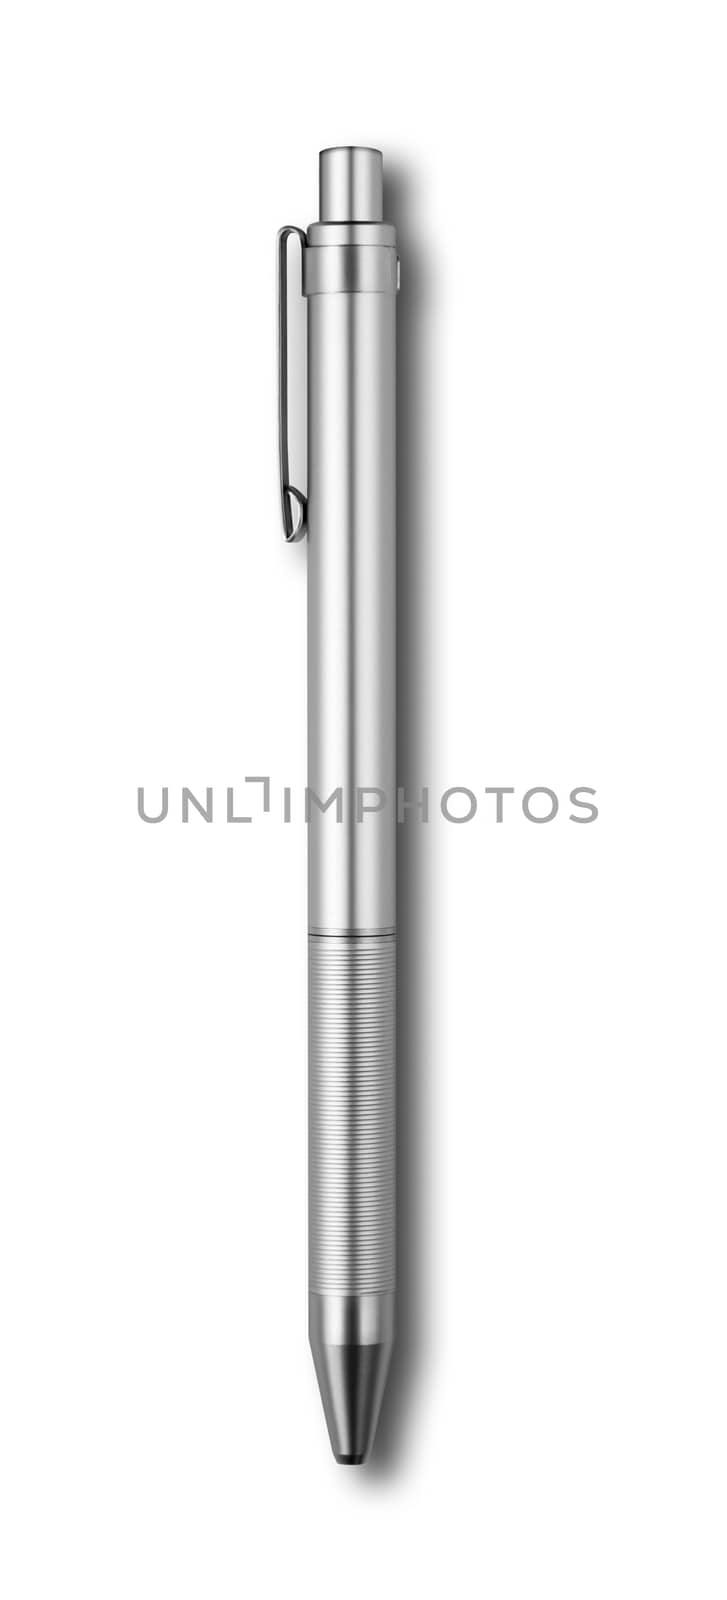 Steel metal pen isolated on white background